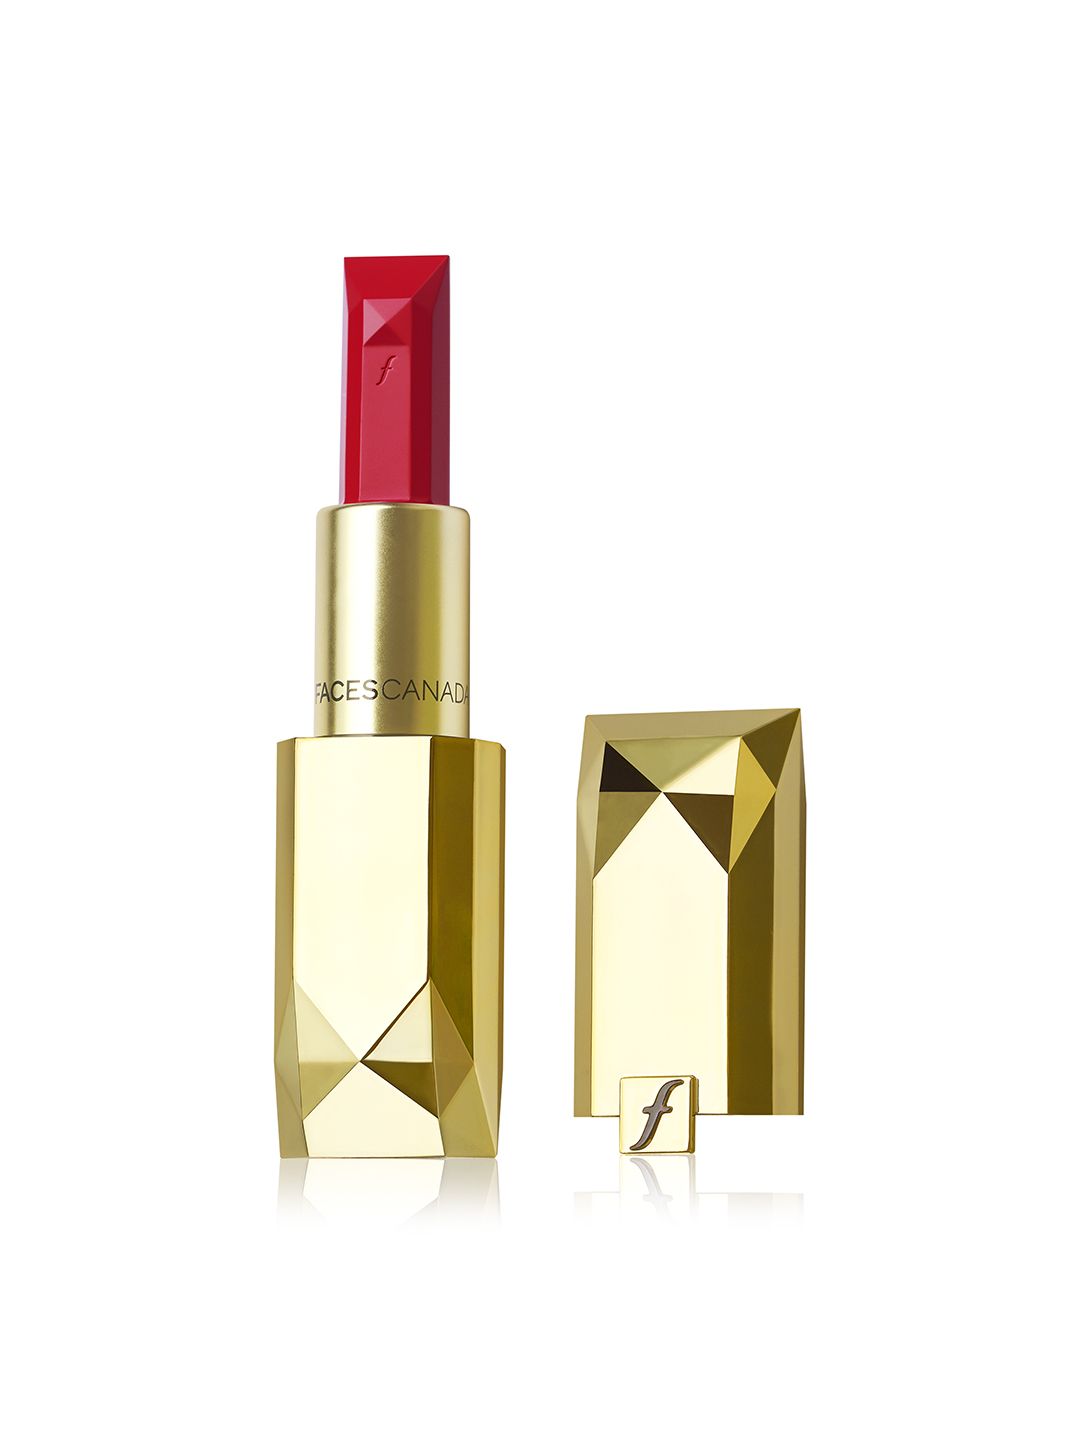 Faces Canada Belle De Luxe Luxury Lipstick with Rose Extracts Mi Amor 3.8g Price in India